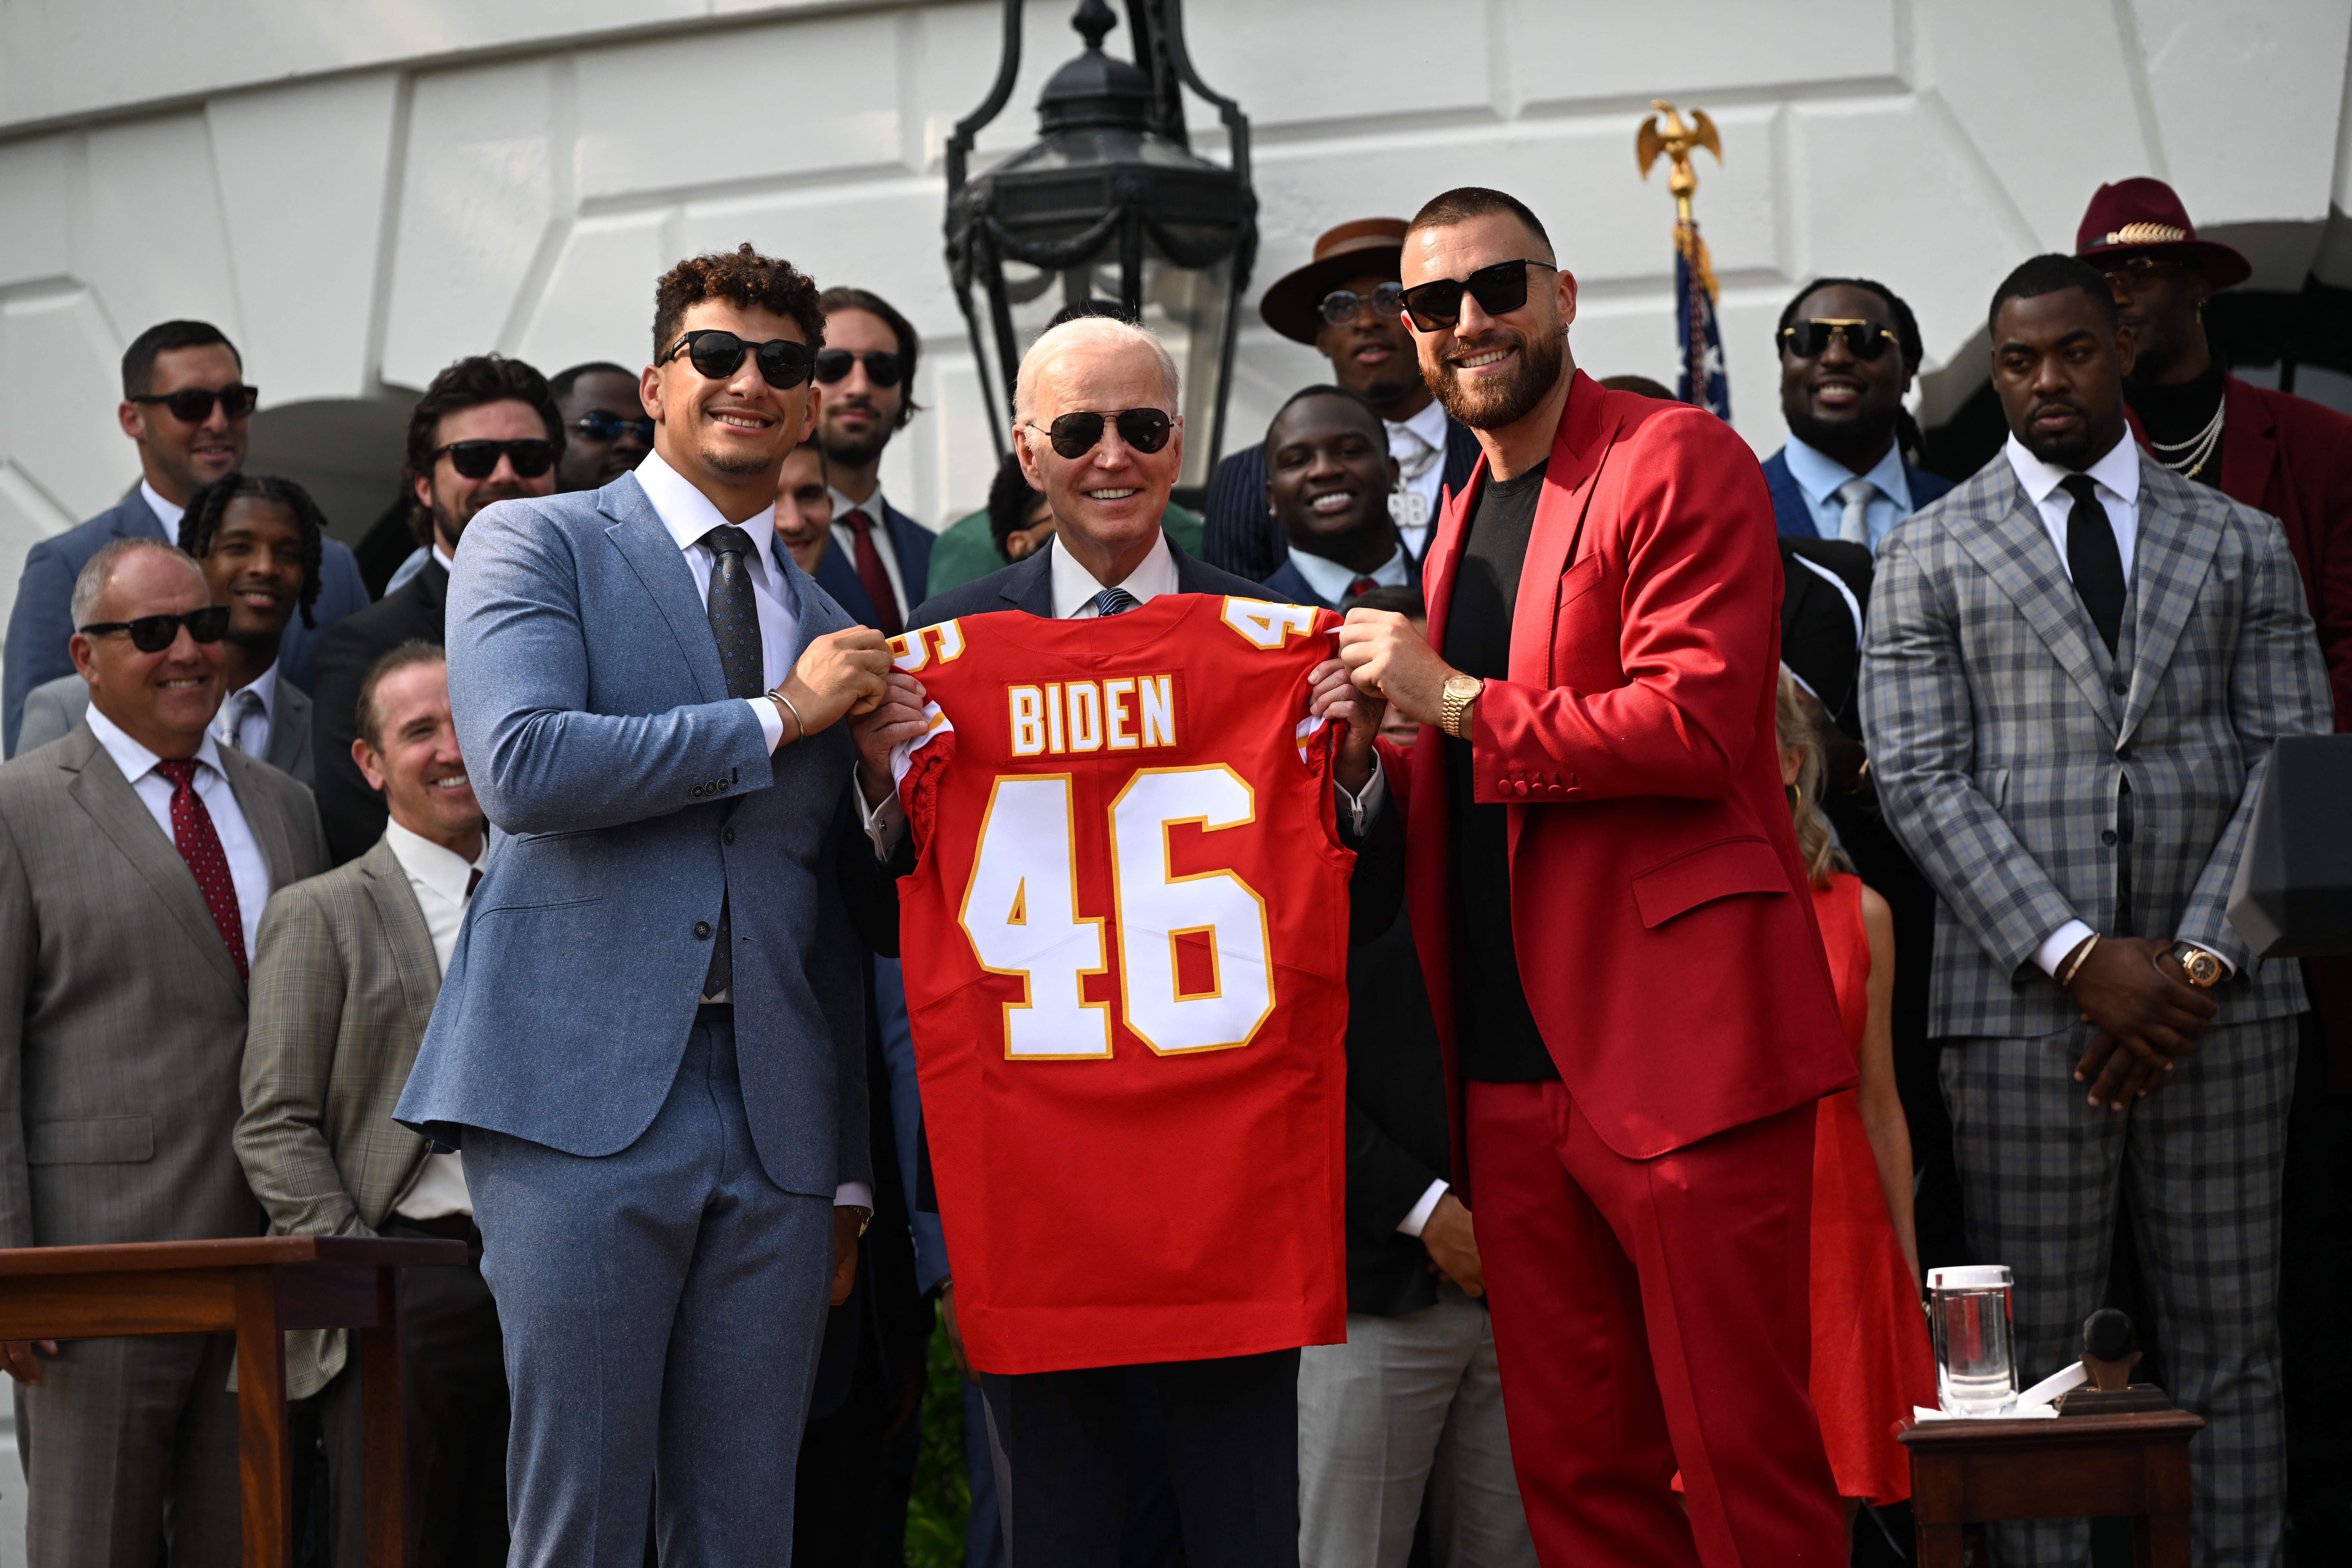 Chiefs to visit White House to celebrate Super Bowl LVIII win on May 31st